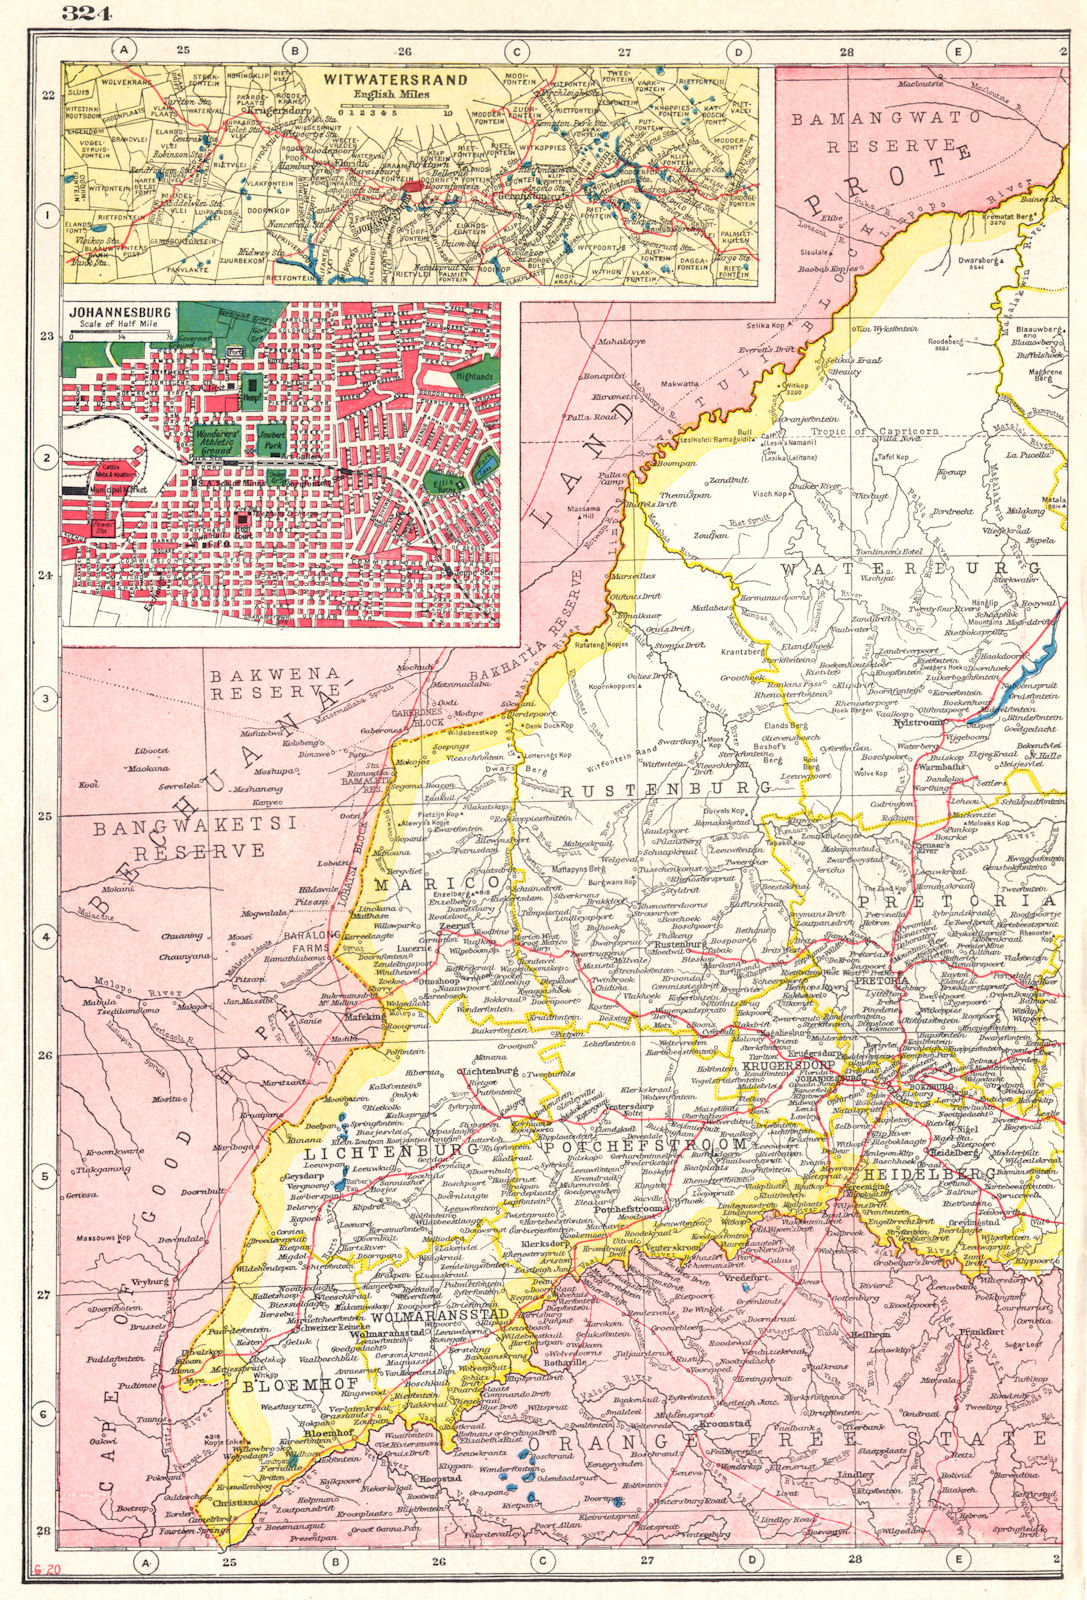 TRANSVAAL WEST. SOUTH AFRICA. Inset Witwatersrand; Johannesburg 1920 old map